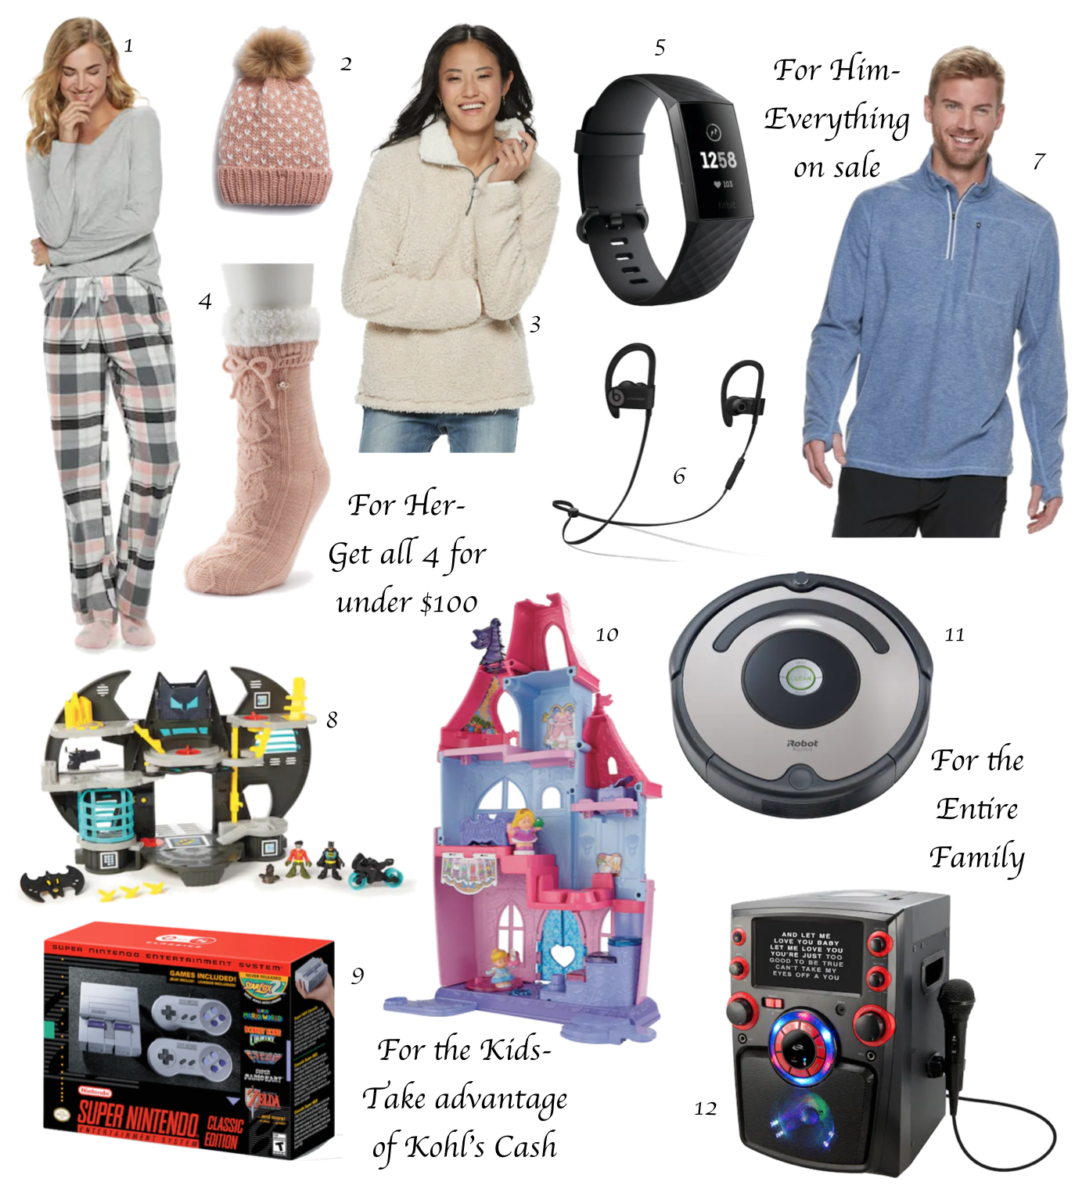 Kohls' Gift Guide with Buy More Save More $